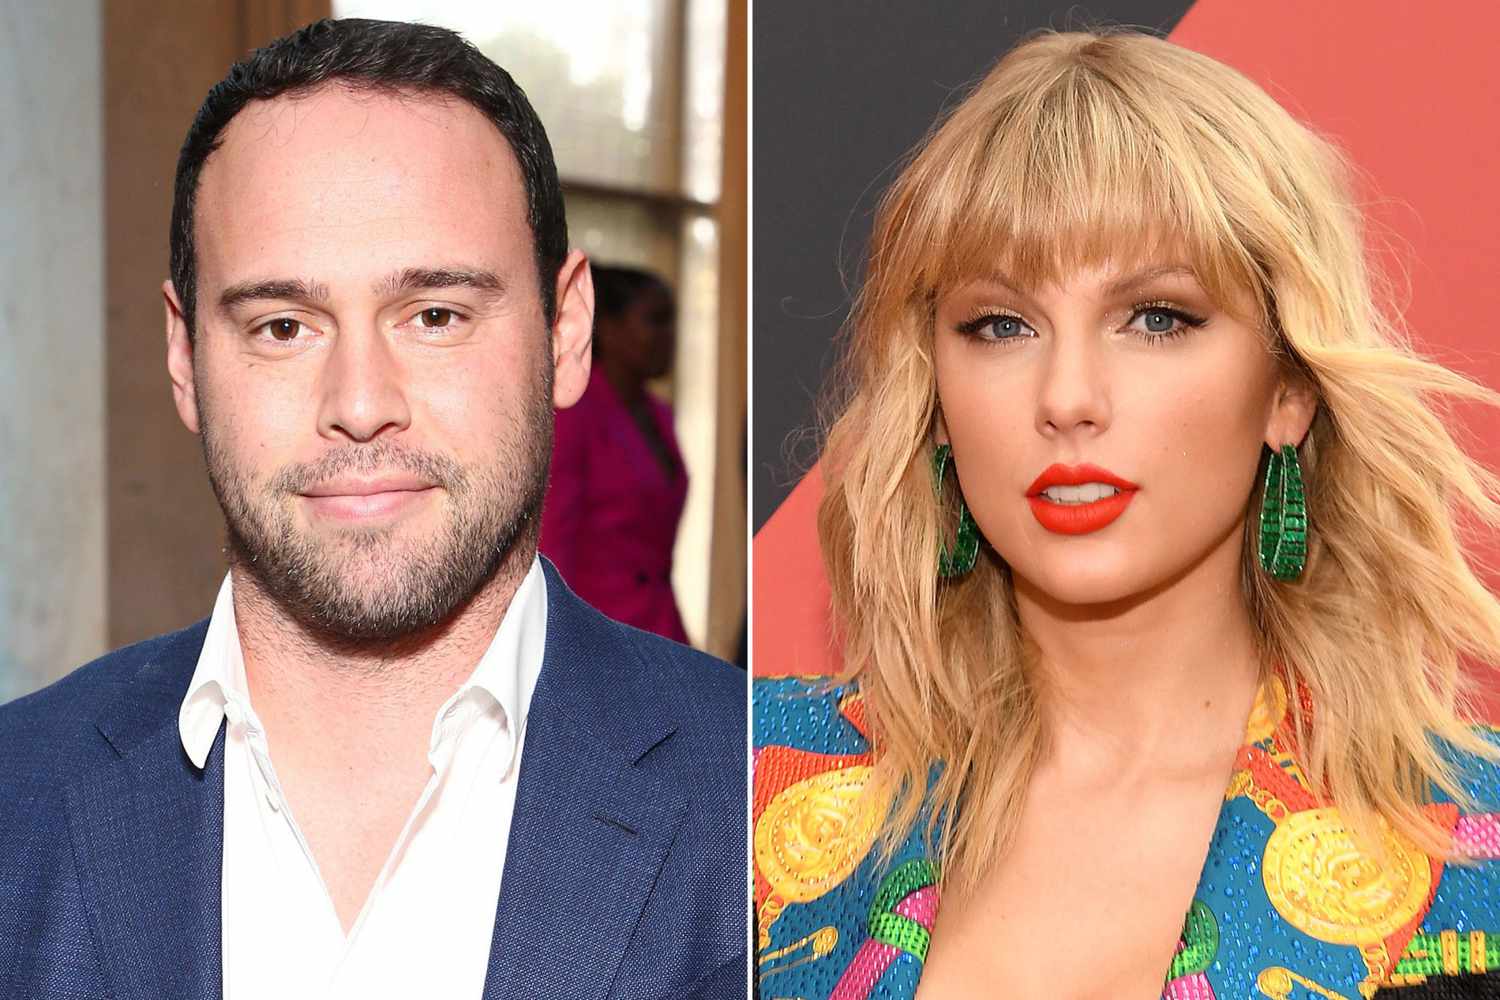 Scooter Braun shares his 'regret' after purchasing Taylor Swift's musical catalog